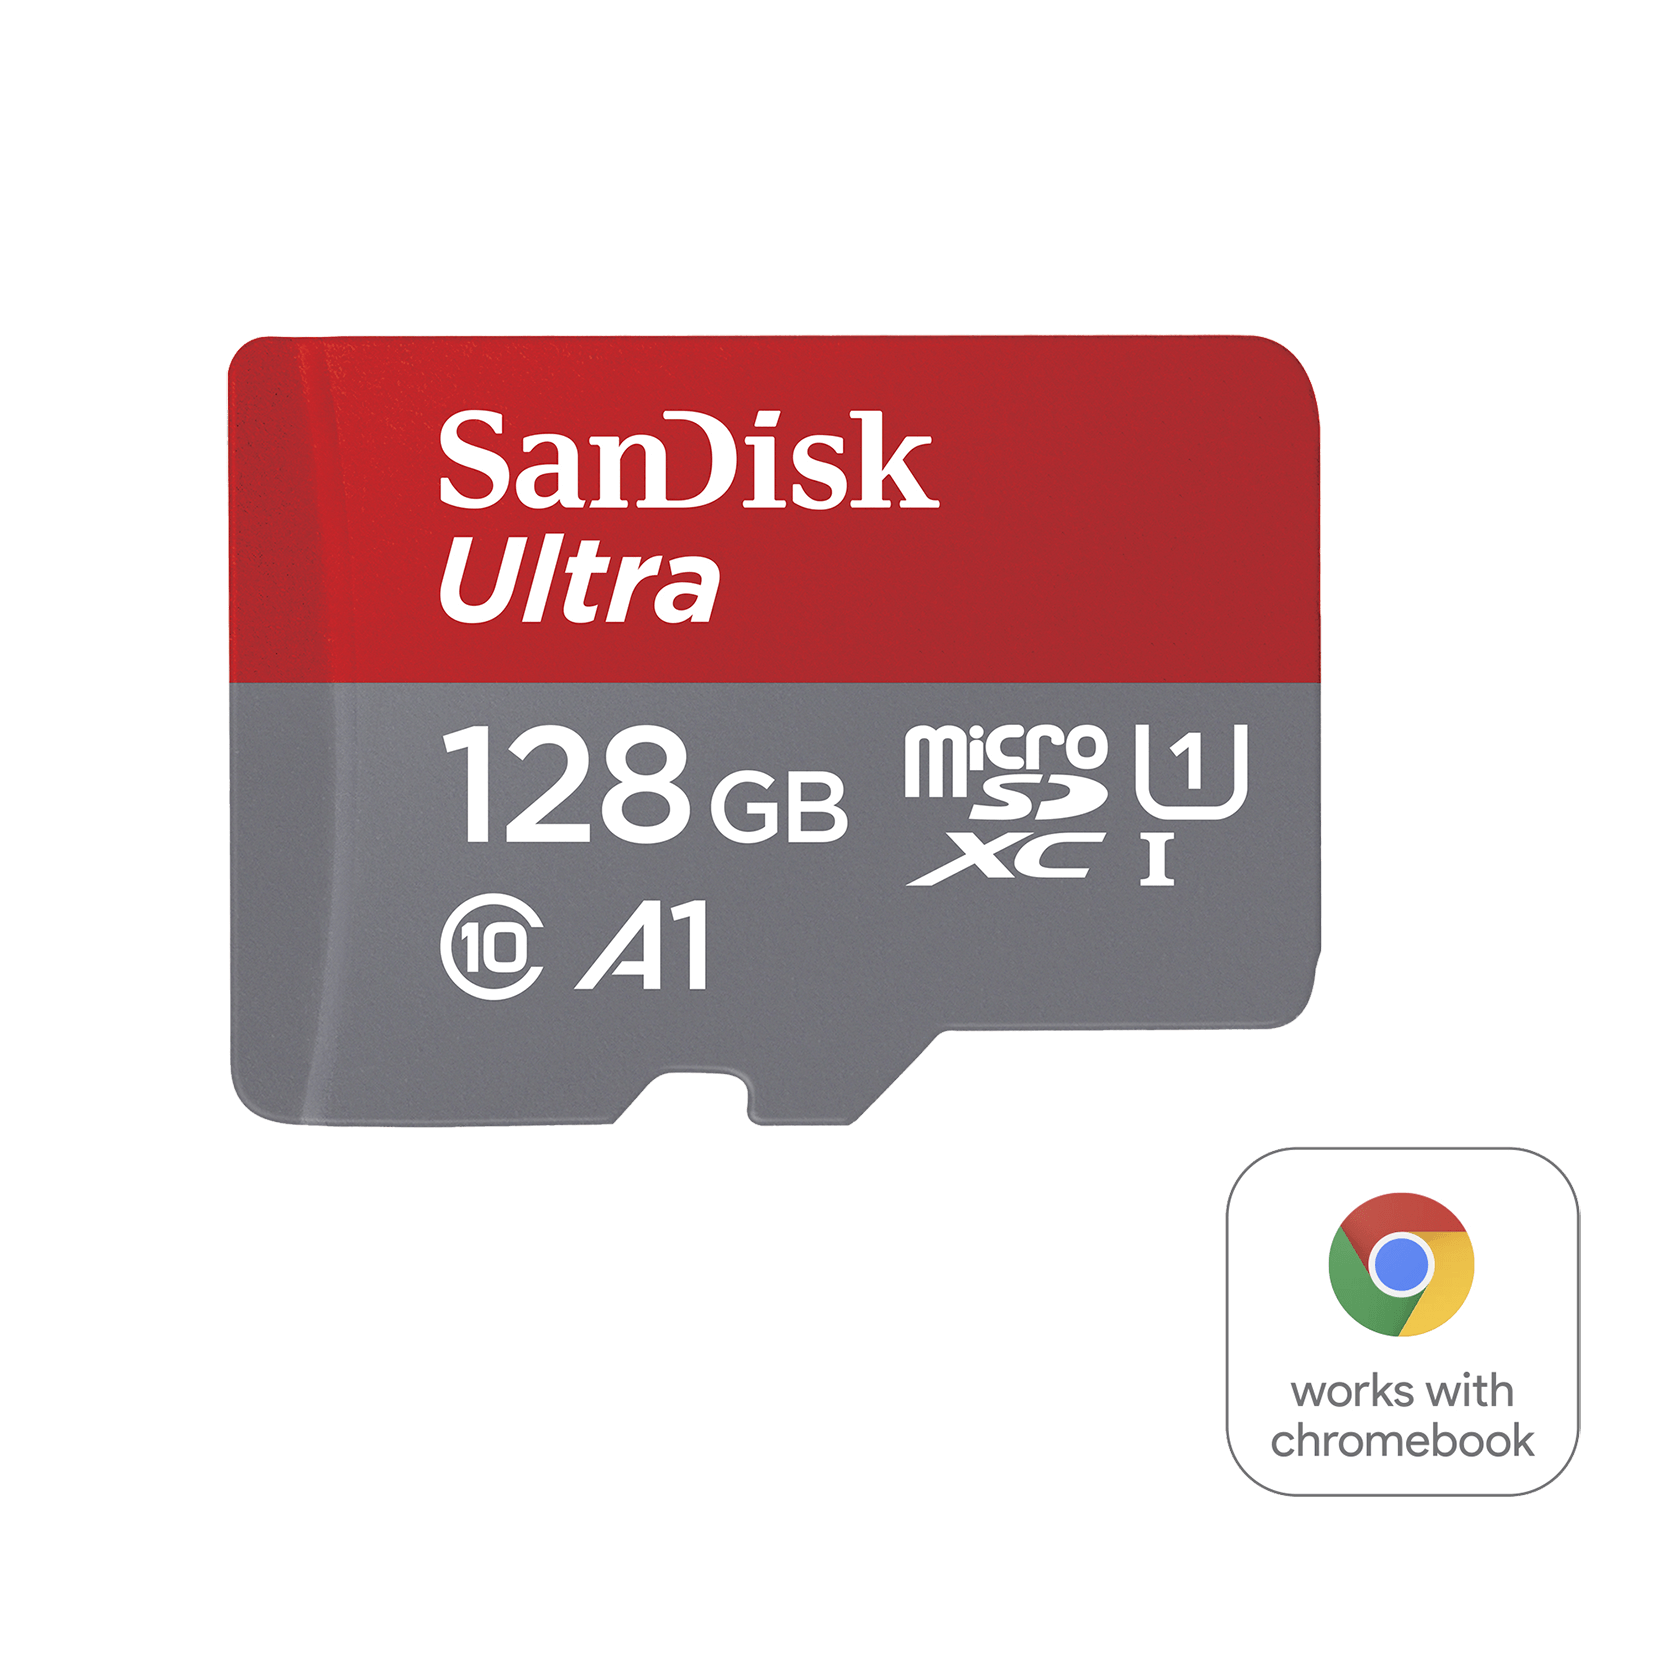 SanDisk Ultra® MicroSDXC™ UHS-I Card with Adapter - 128GB - SDSQUA4-128G-GN6FA